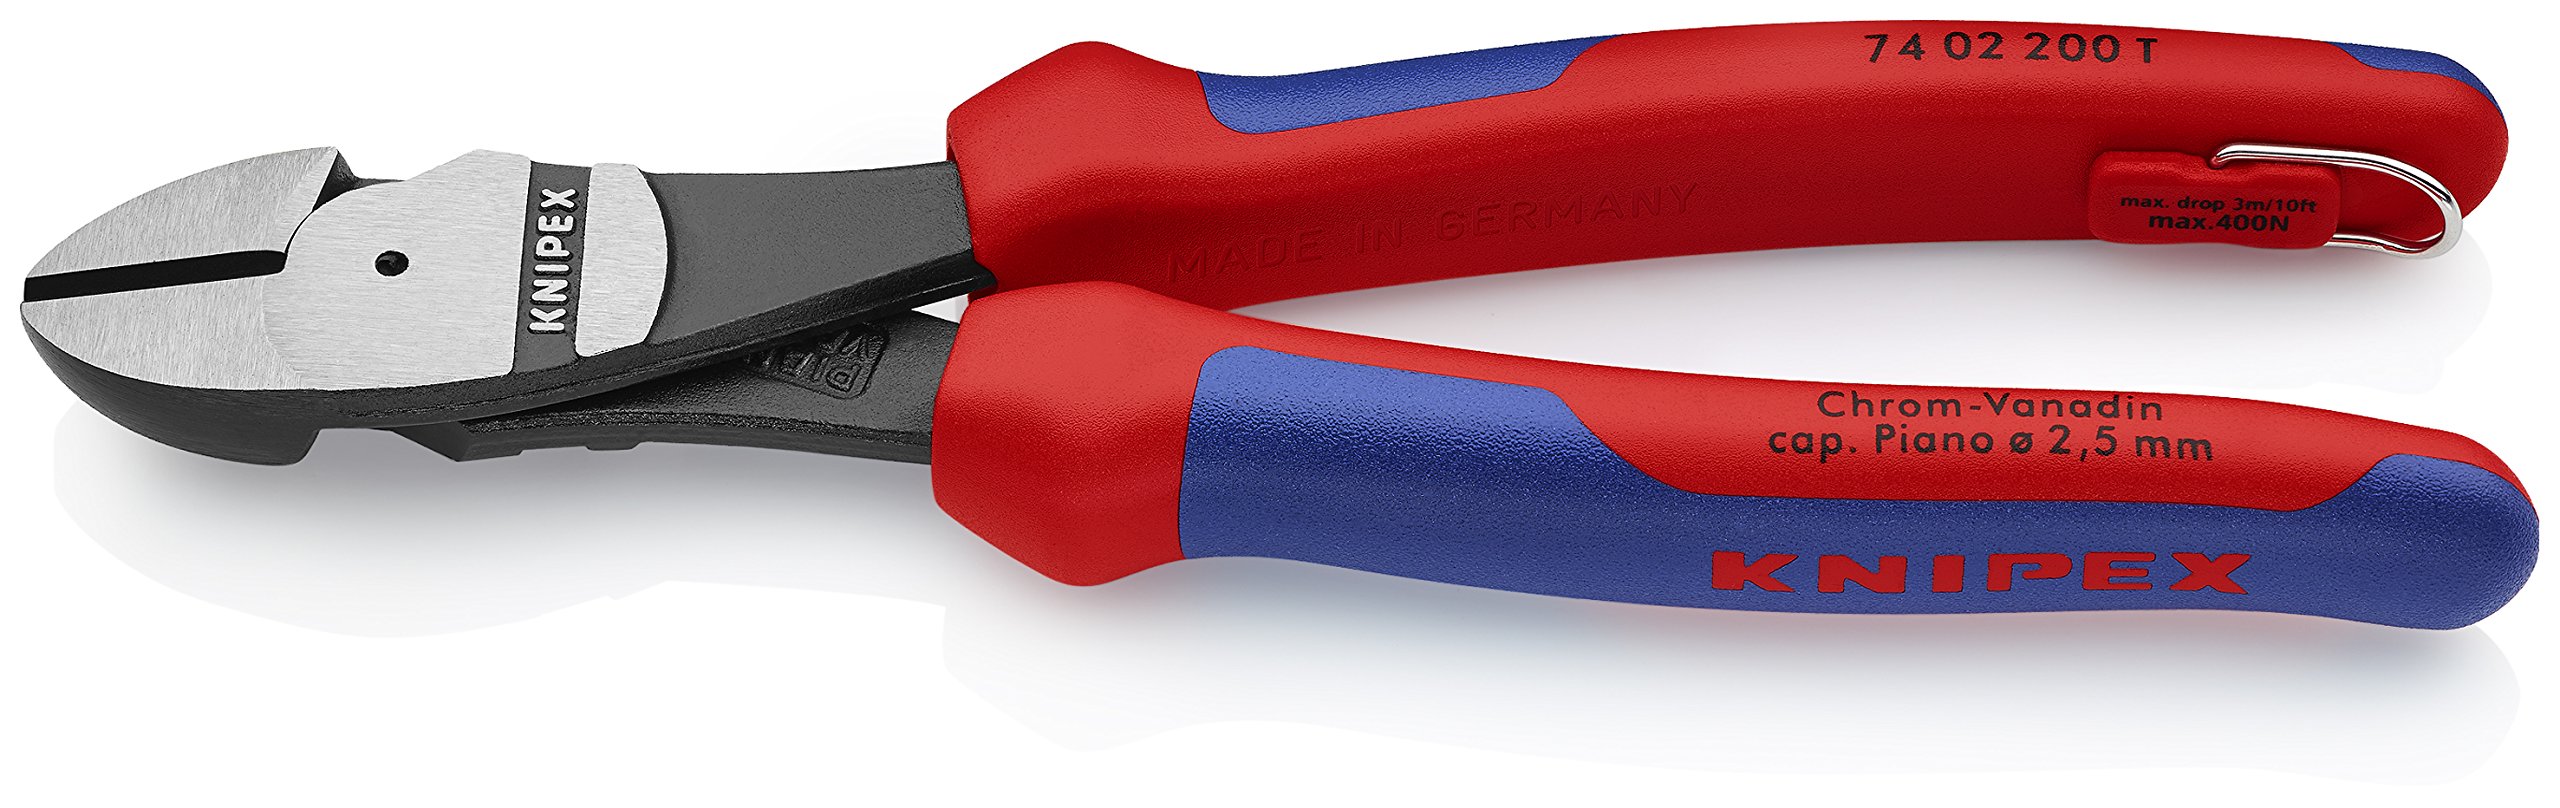 KNIPEX Tools - High Leverage Diagonal Cutters, Multi-Component (7402250), 10 inches $34.99 Amazon - $34.99